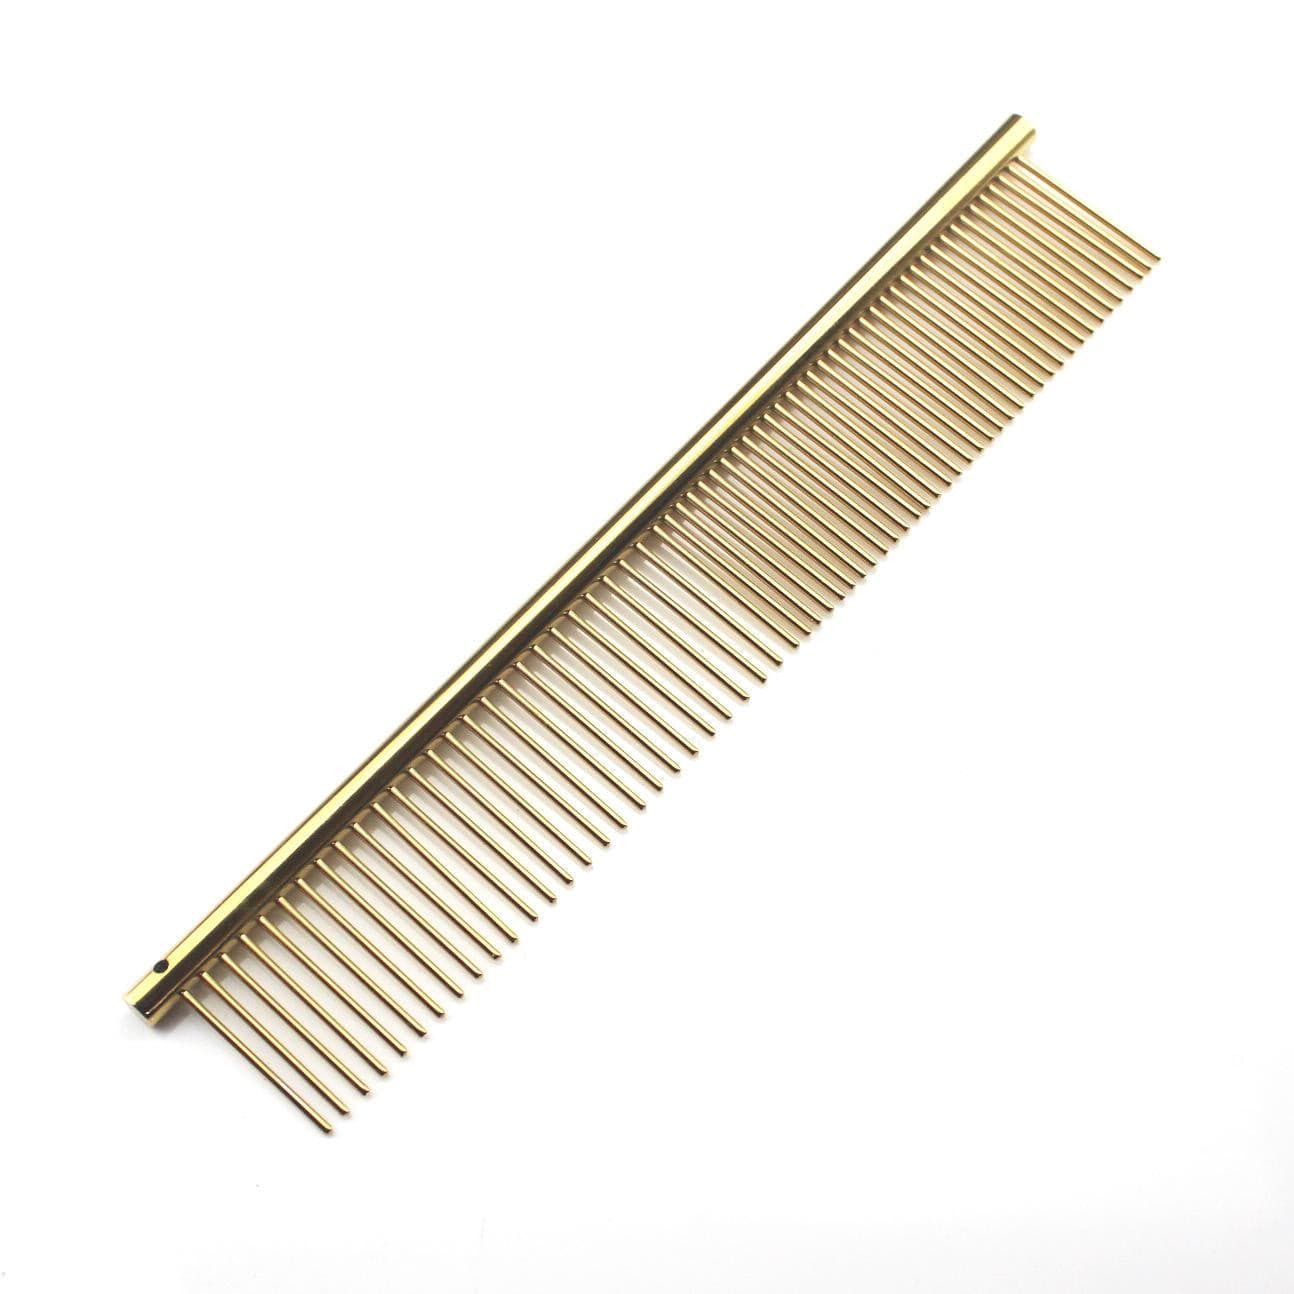 Stainless Steel Medium Pet Comb | Works well with hair mats | Keeps your pet well groomed.